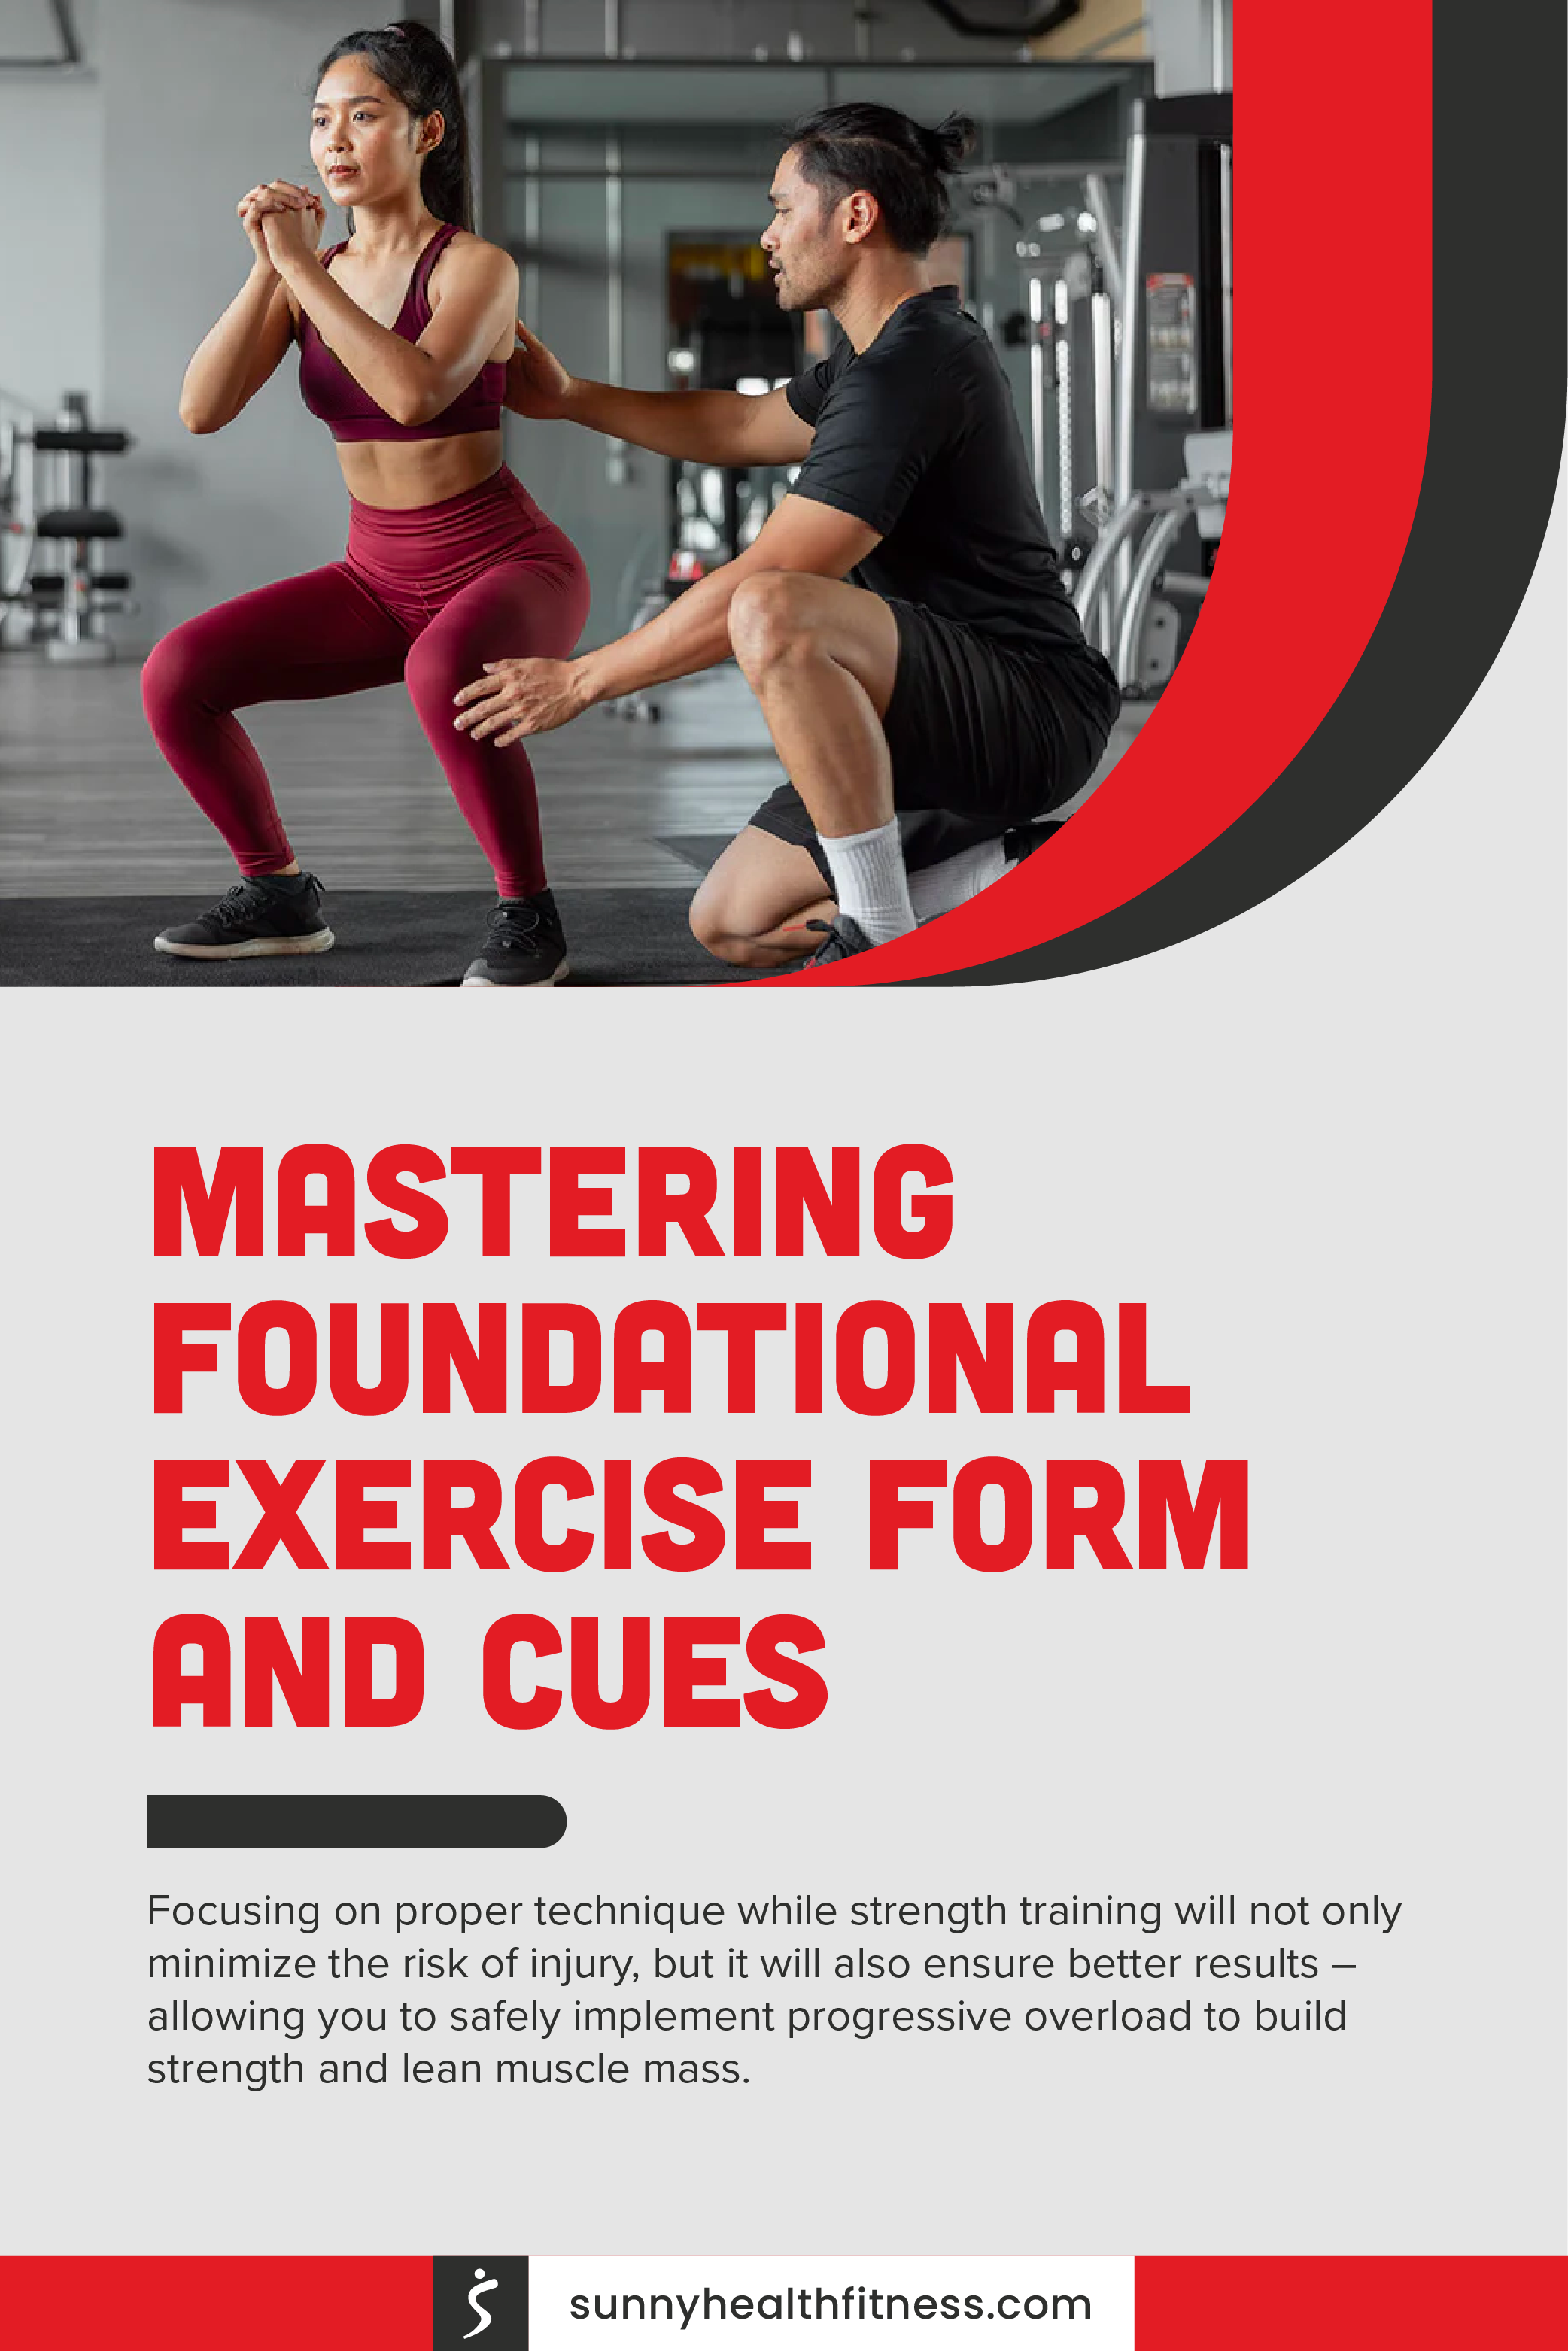 Mastering Foundational Exercise Form and Cues